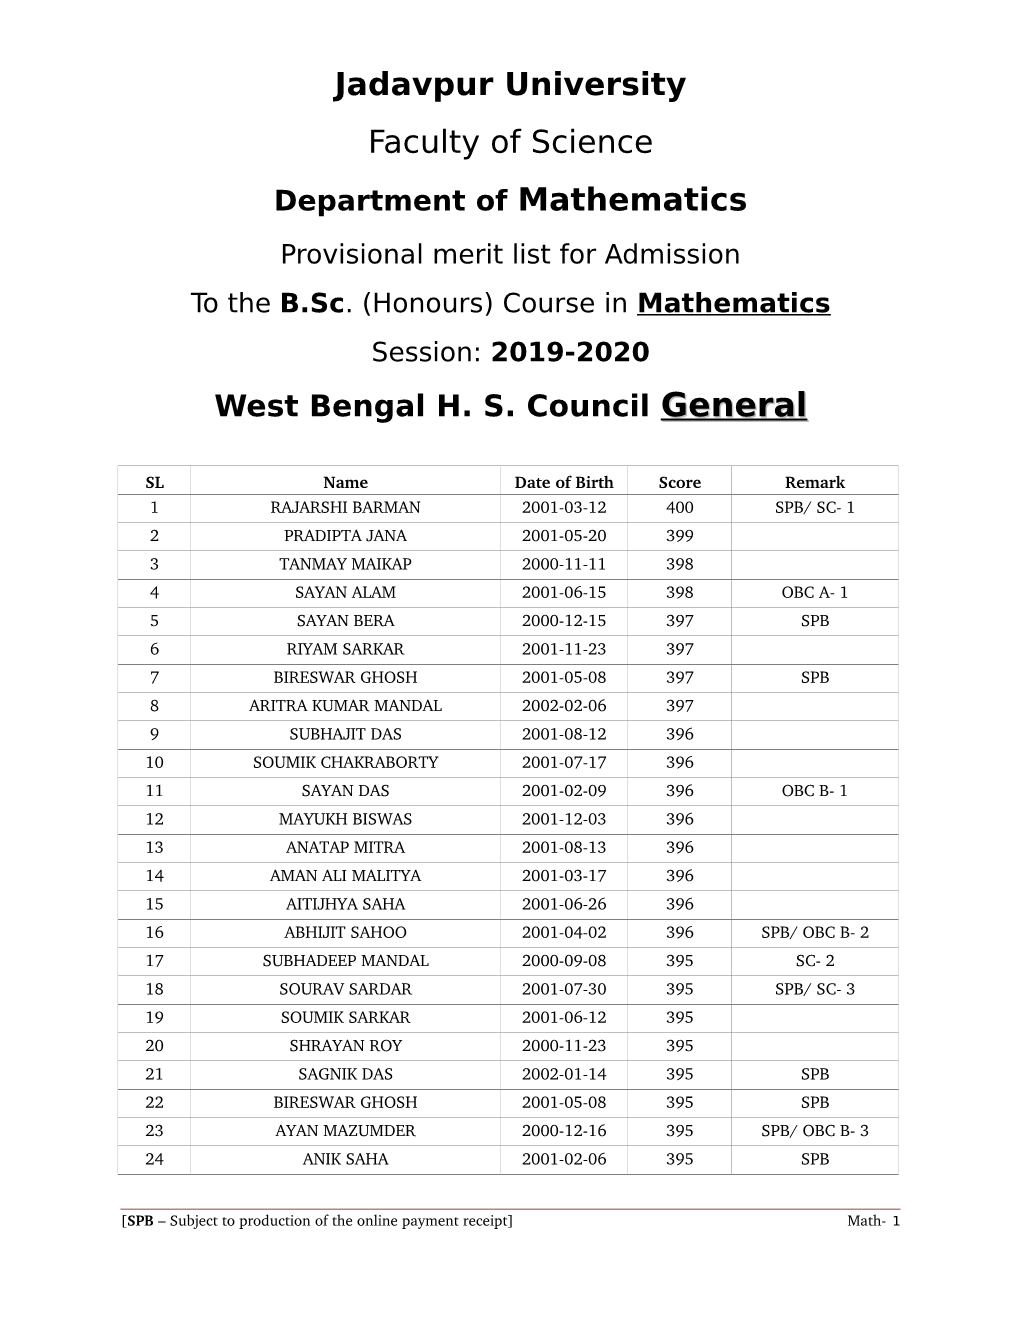 Jadavpur University Faculty of Science Department of Mathematics Provisional Merit List for Admission to the B.Sc